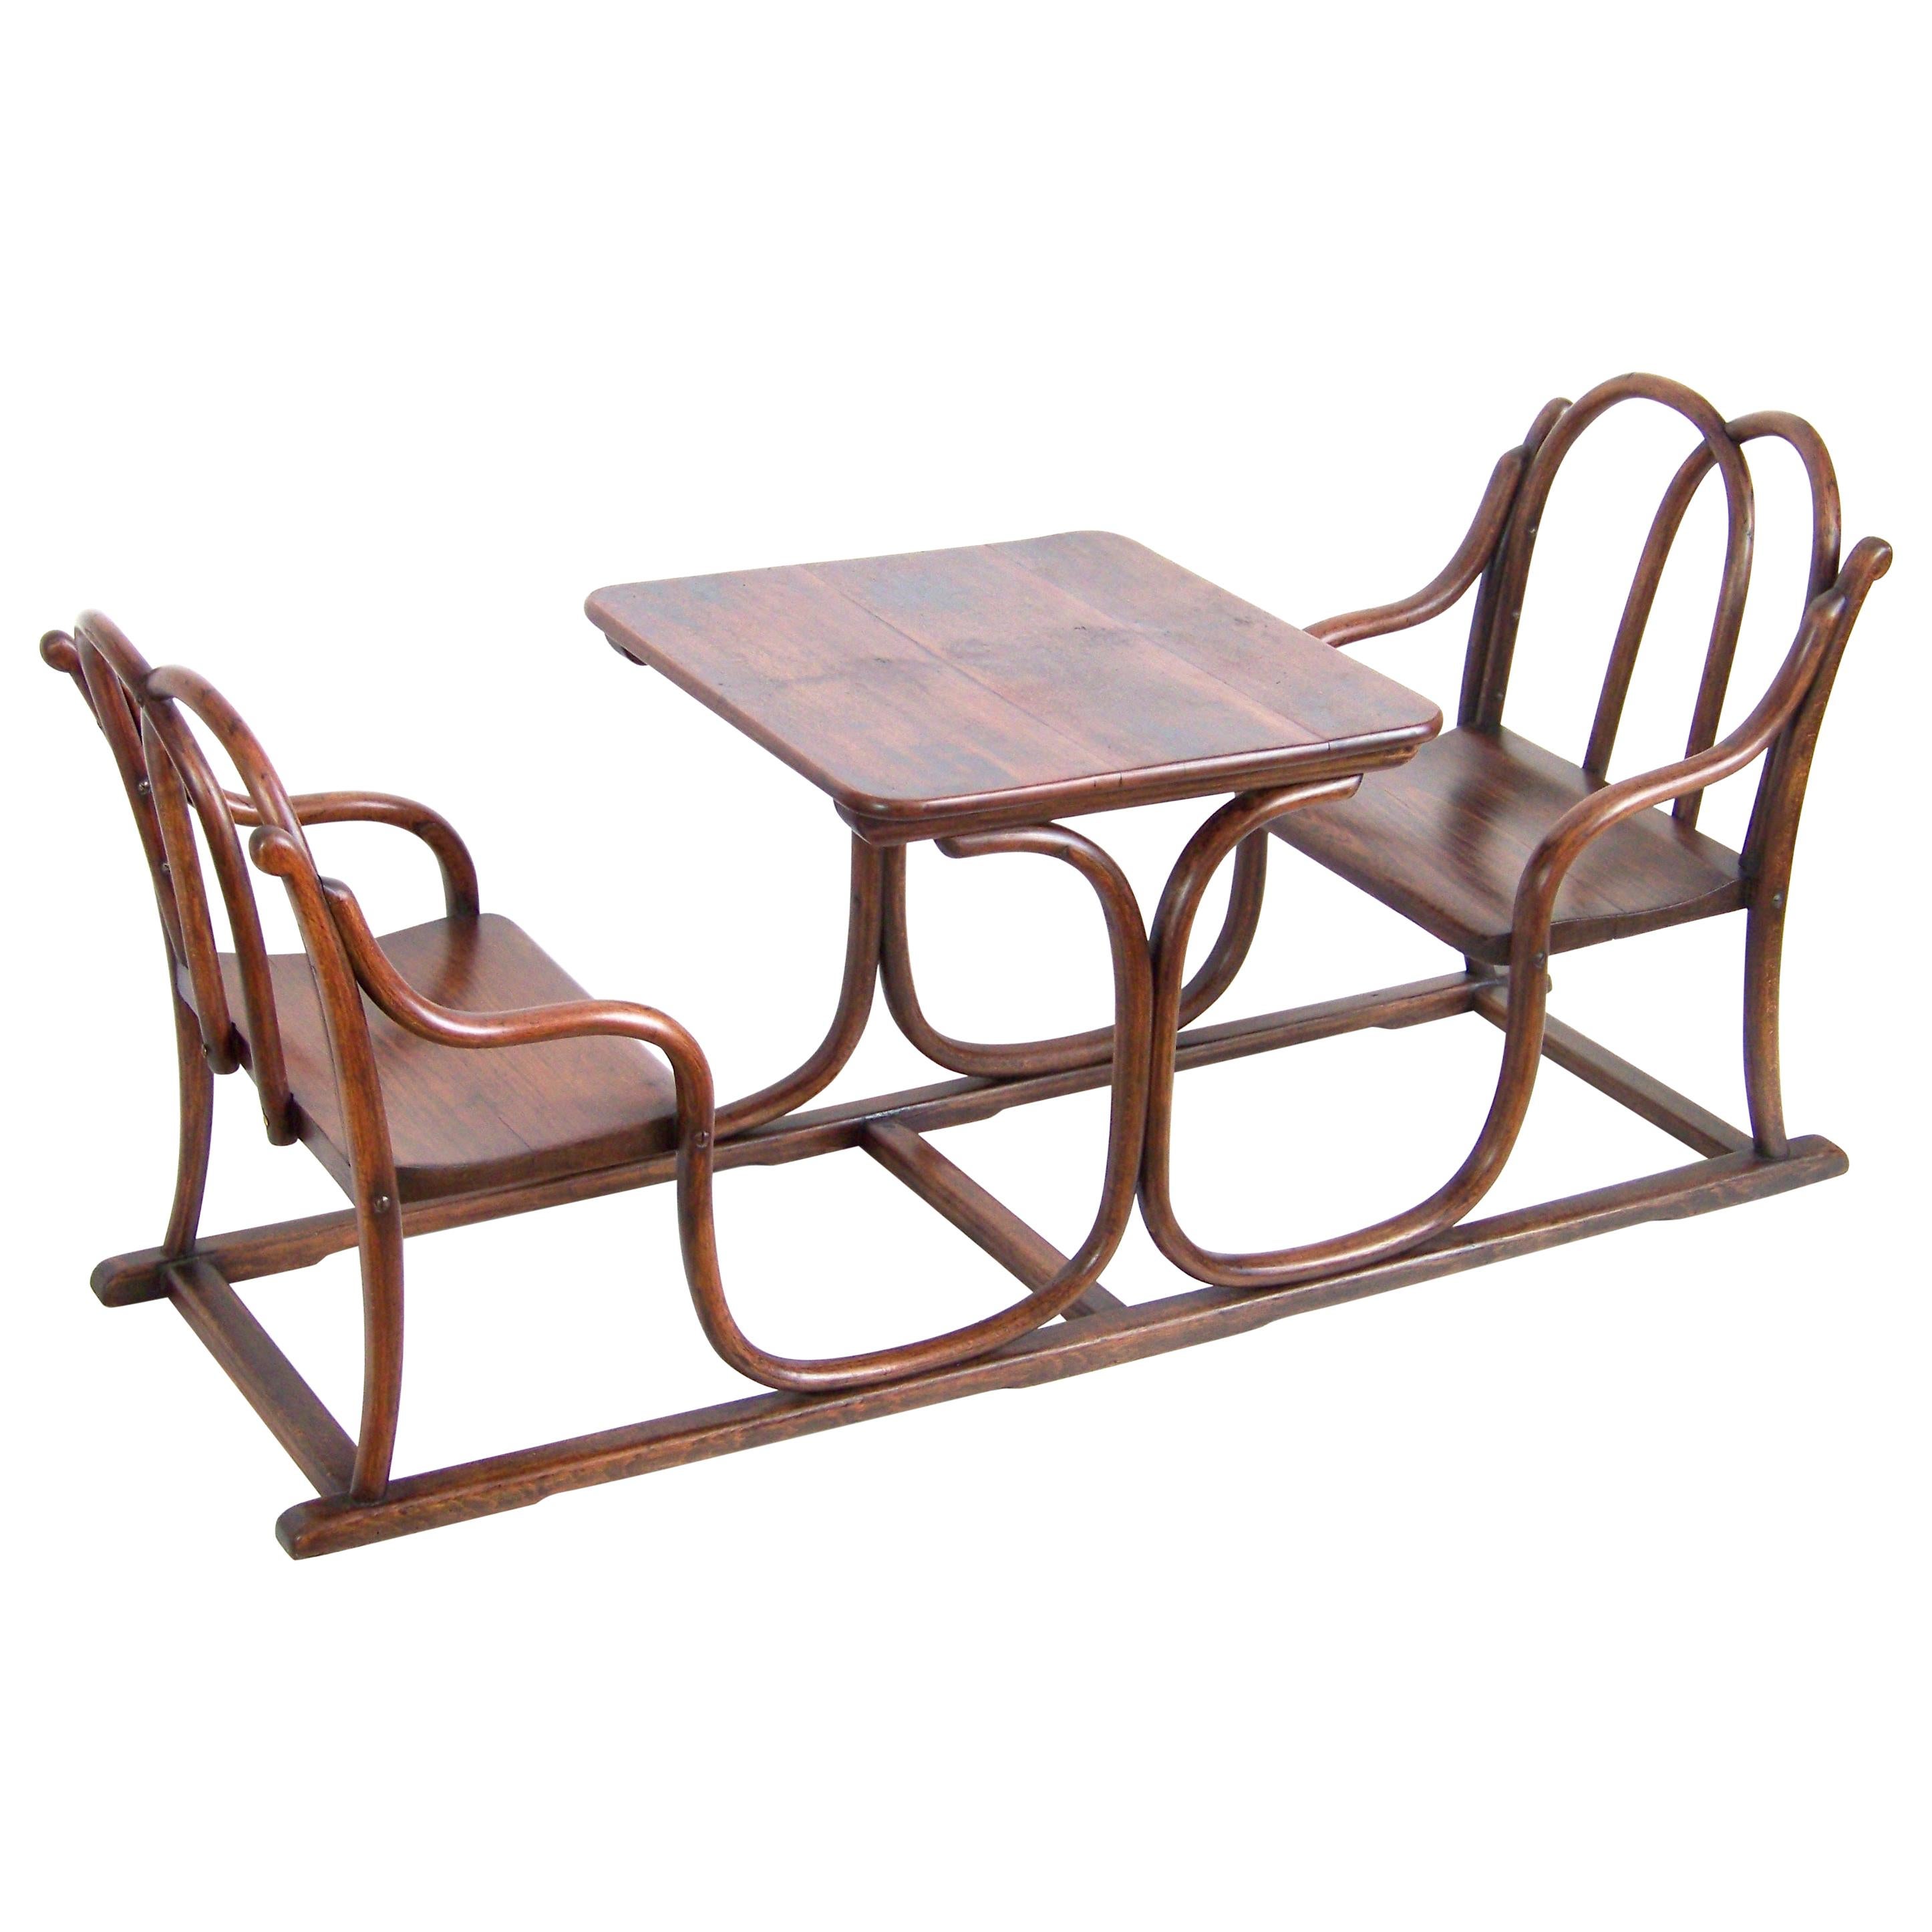 Double Children's Bench, Chair, with Table Thonet, from 1885